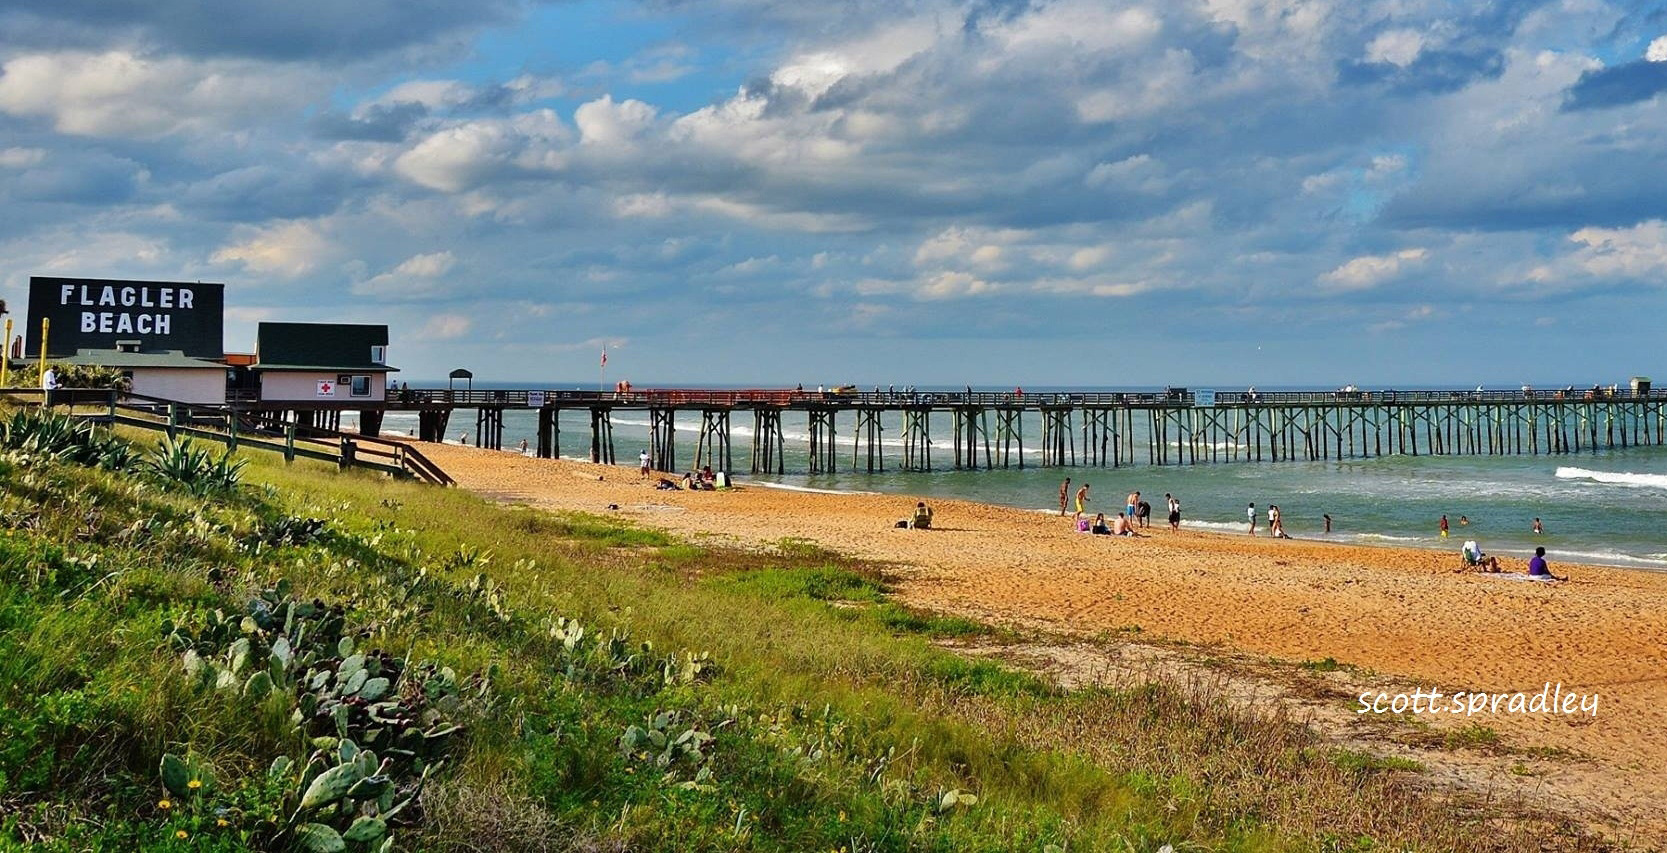 Flagler Beach attorney Scott Spradley will present this photograph of the pier, which he took, to the City Commission on Oct. 9 as a gift marking his 25 years as a member of the Florida Bar. The 6 fot by 3 foot photo on canvass will be on display in the chambers of the city commission. Click on the image for larger view. (© Scott Spradley for FlaglerLive)